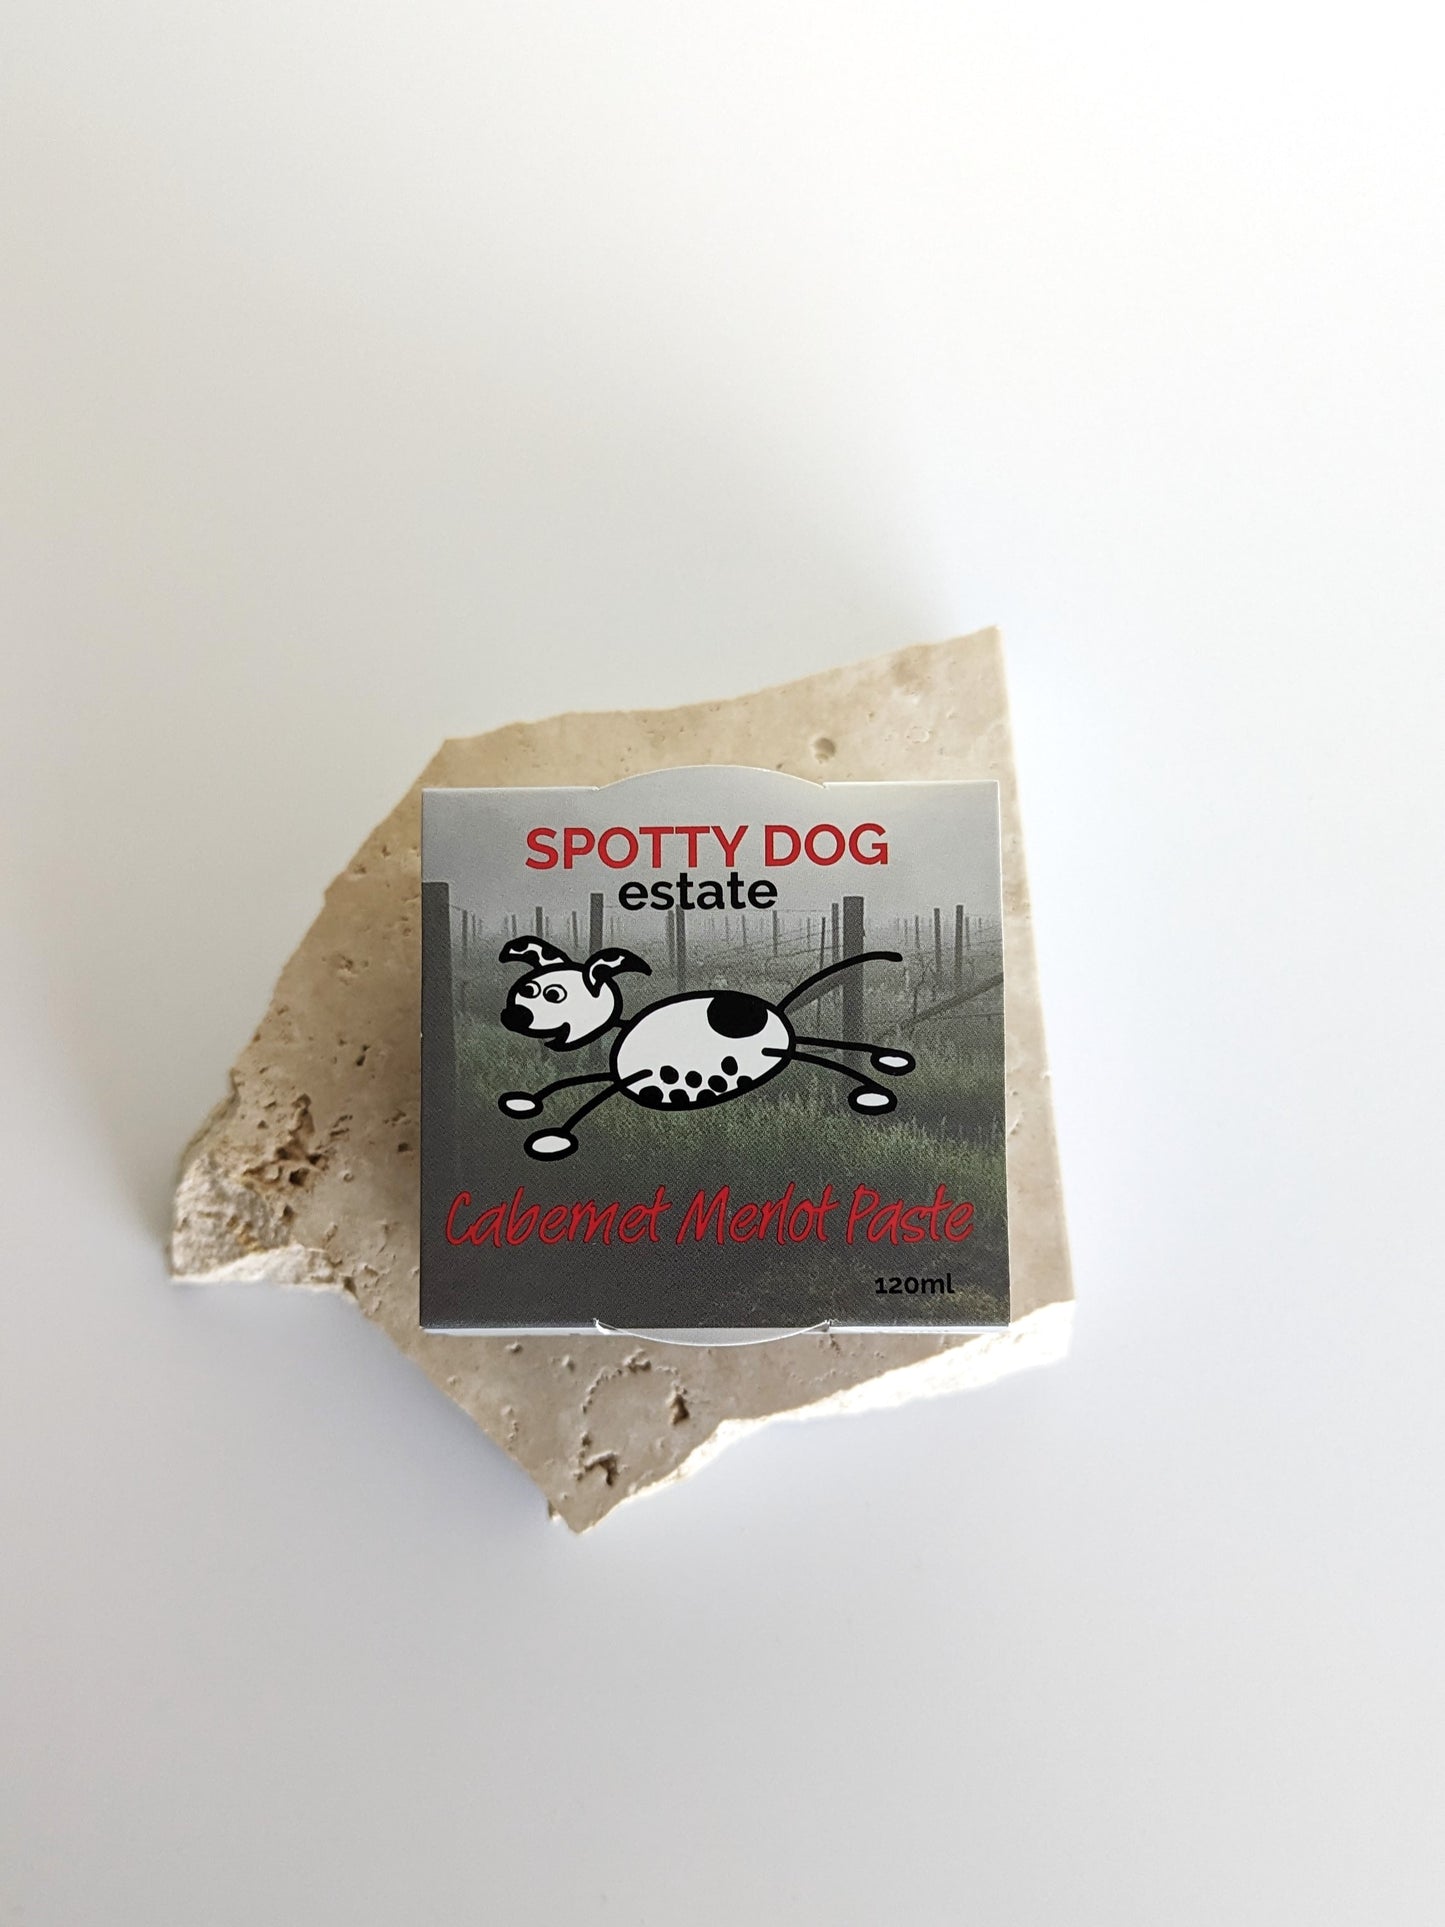 Spotty Dog Pastes - 3 for $20